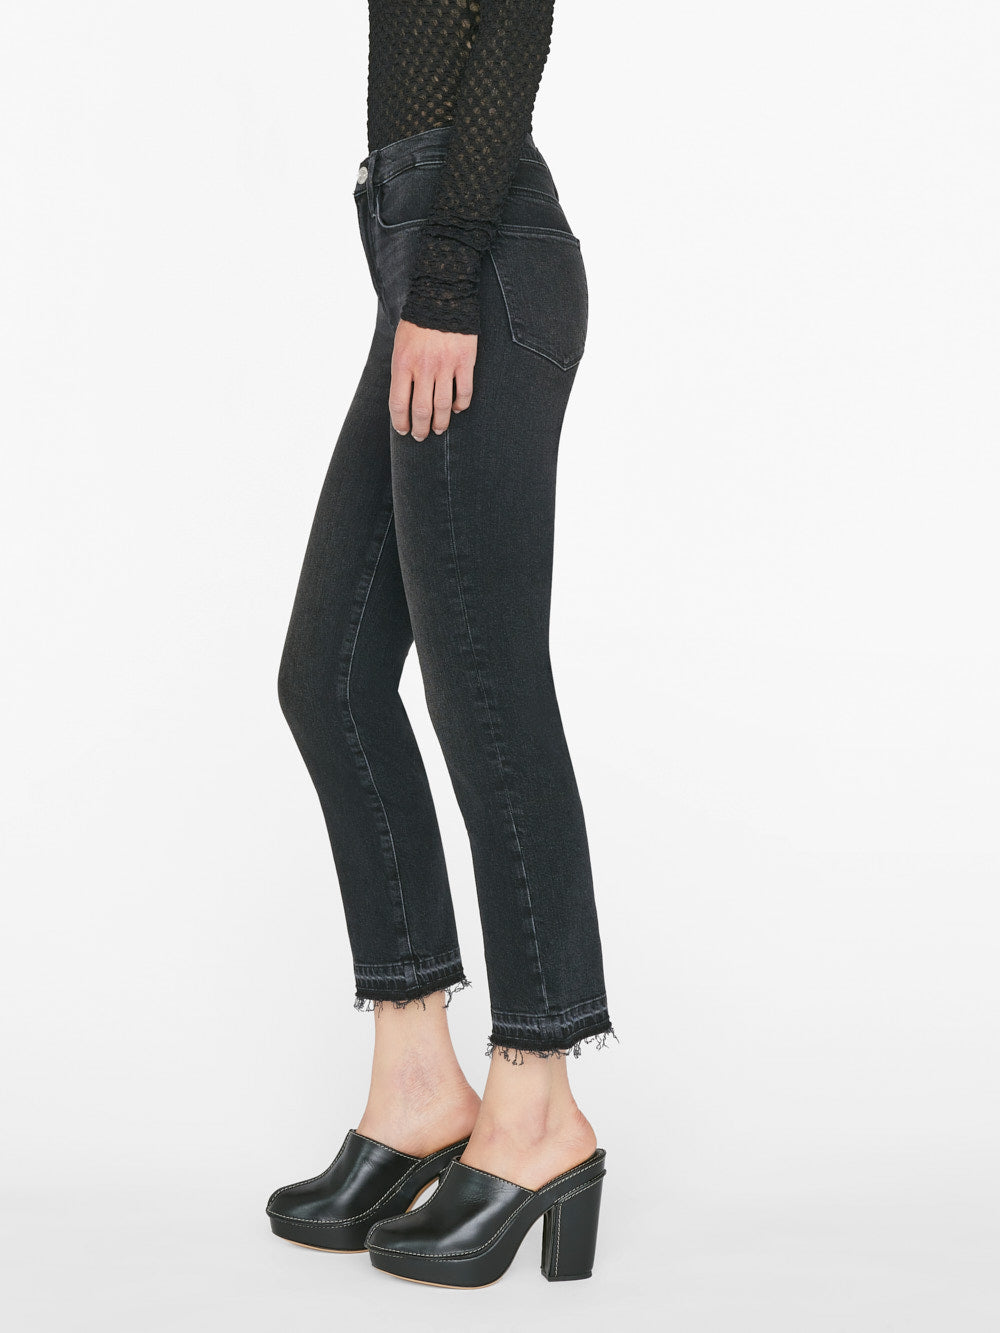 A woman wearing Le High Straight Released Hem - Hutchison black jeans made of premium stretch denim by Frame.